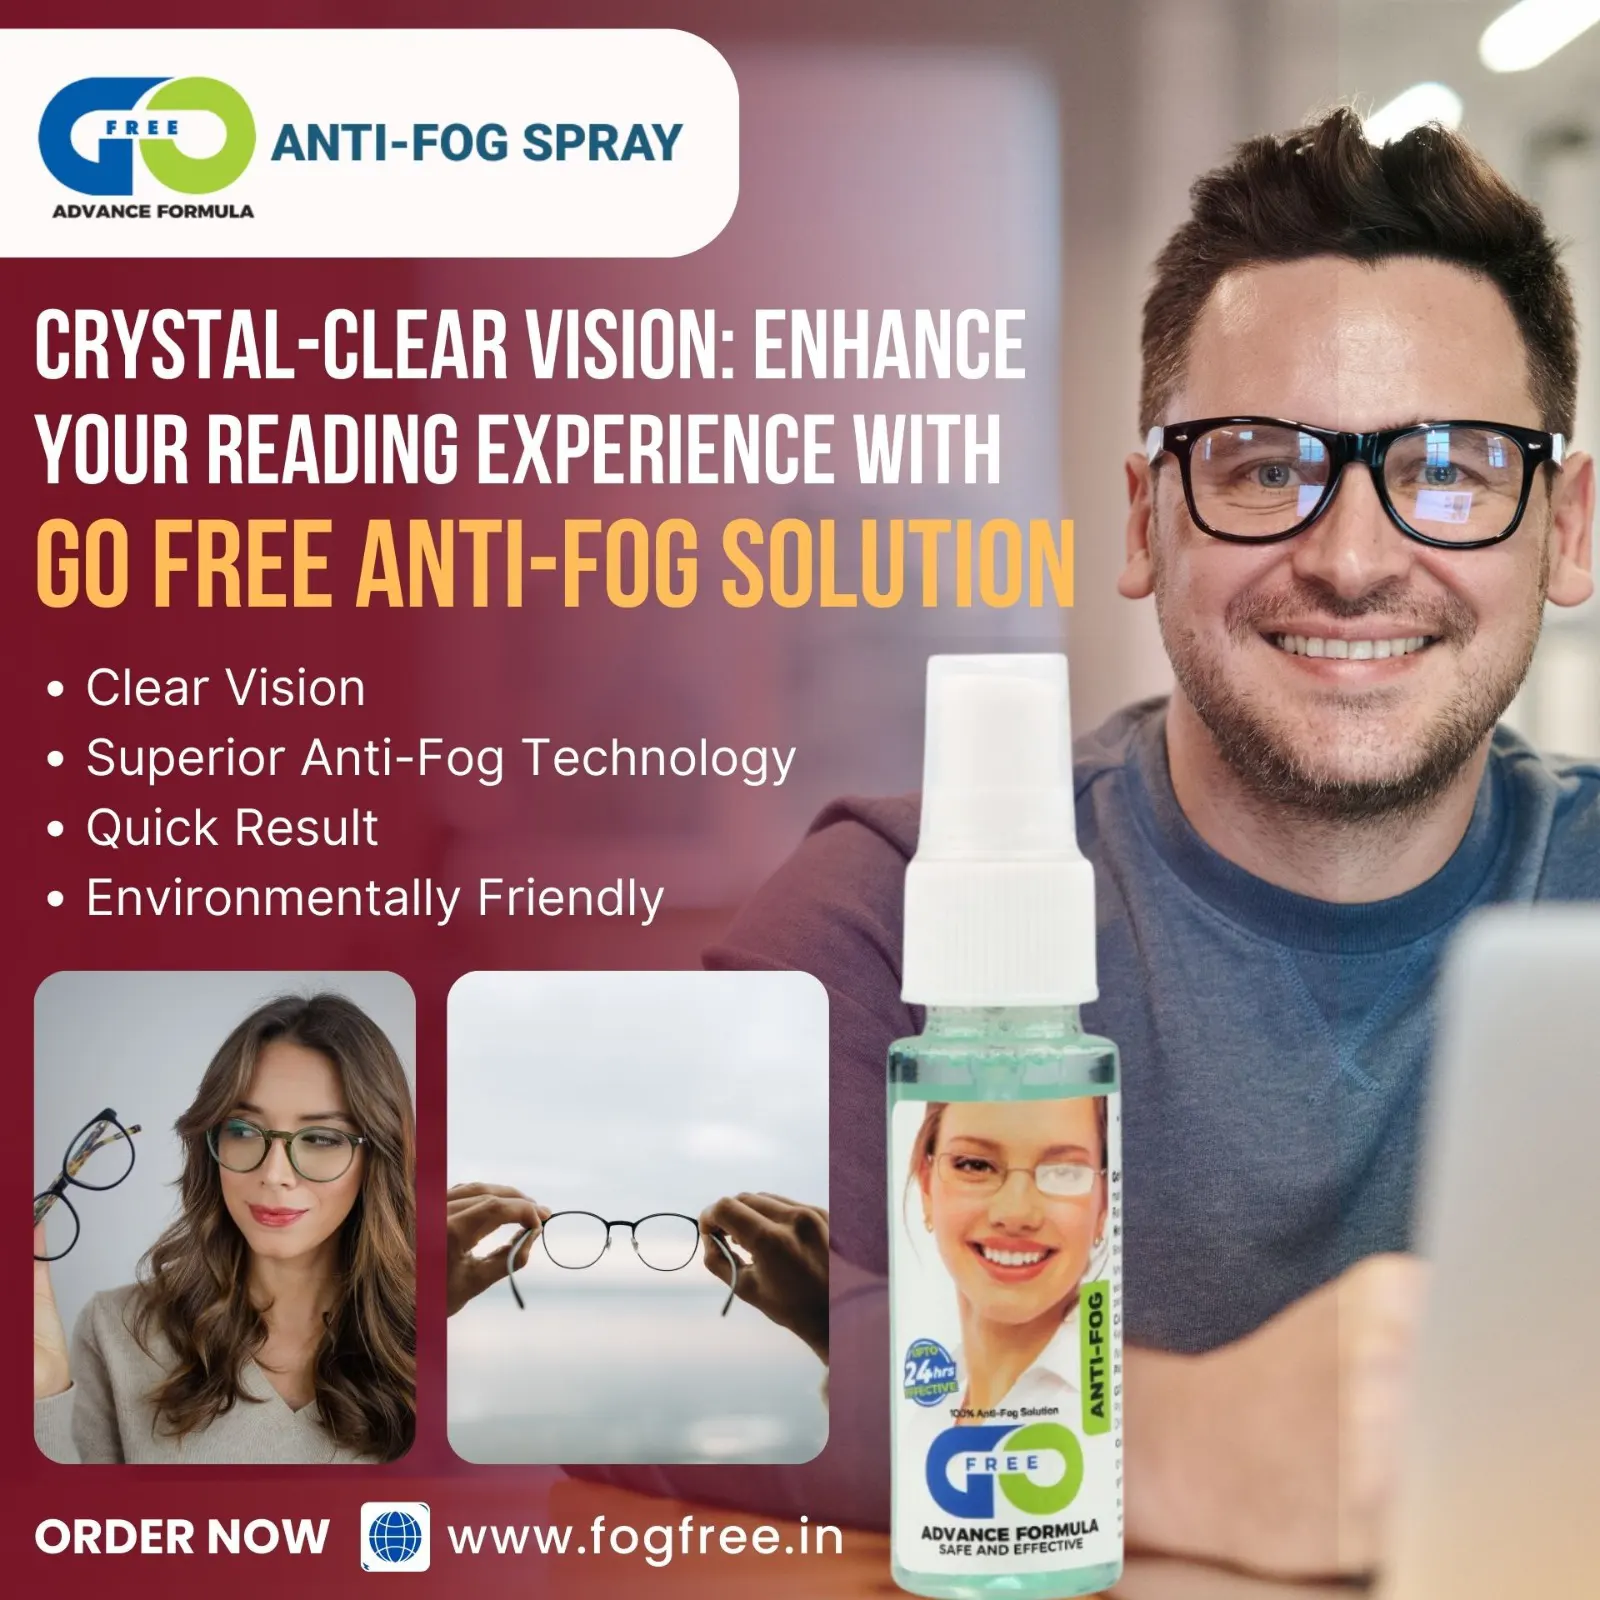 Clear Vision Ahead: Introducing Go Free Anti-Fog Solution for Reading Glasses